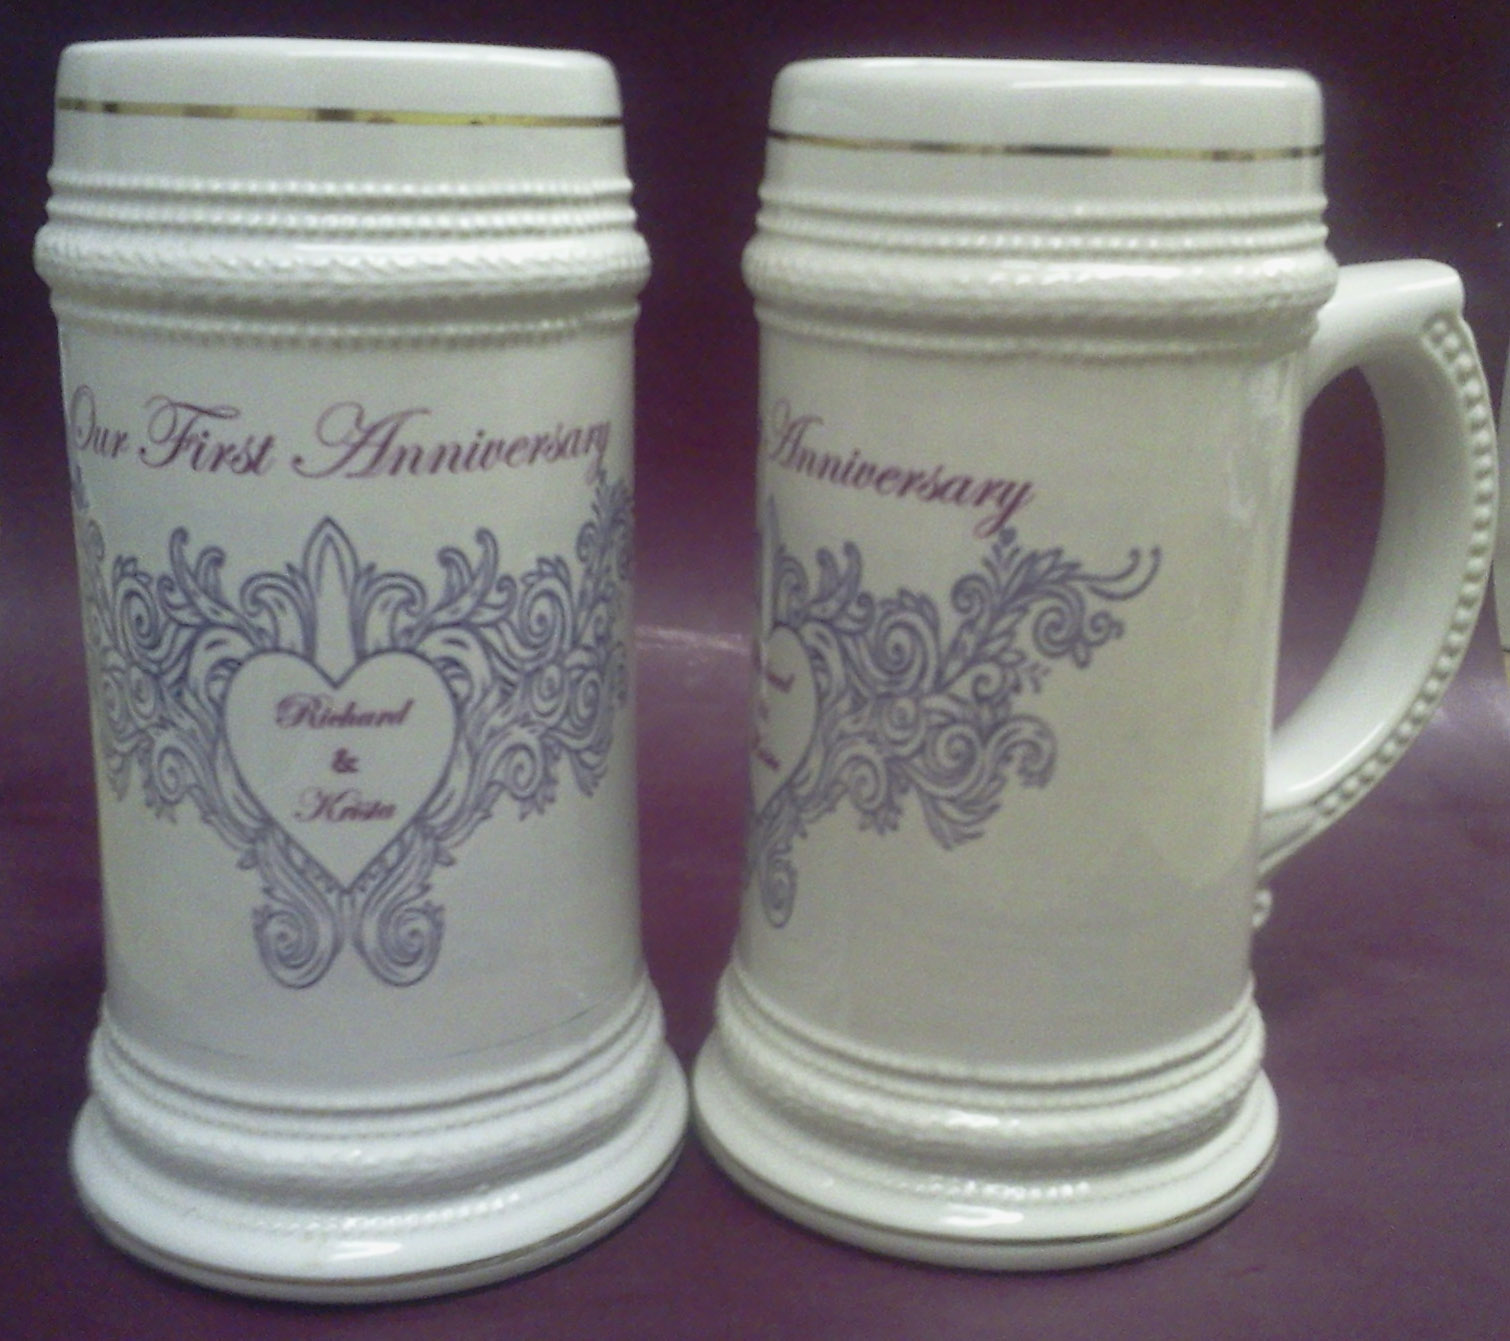 Cool Anniversary Beer Steins made with sublimation printing